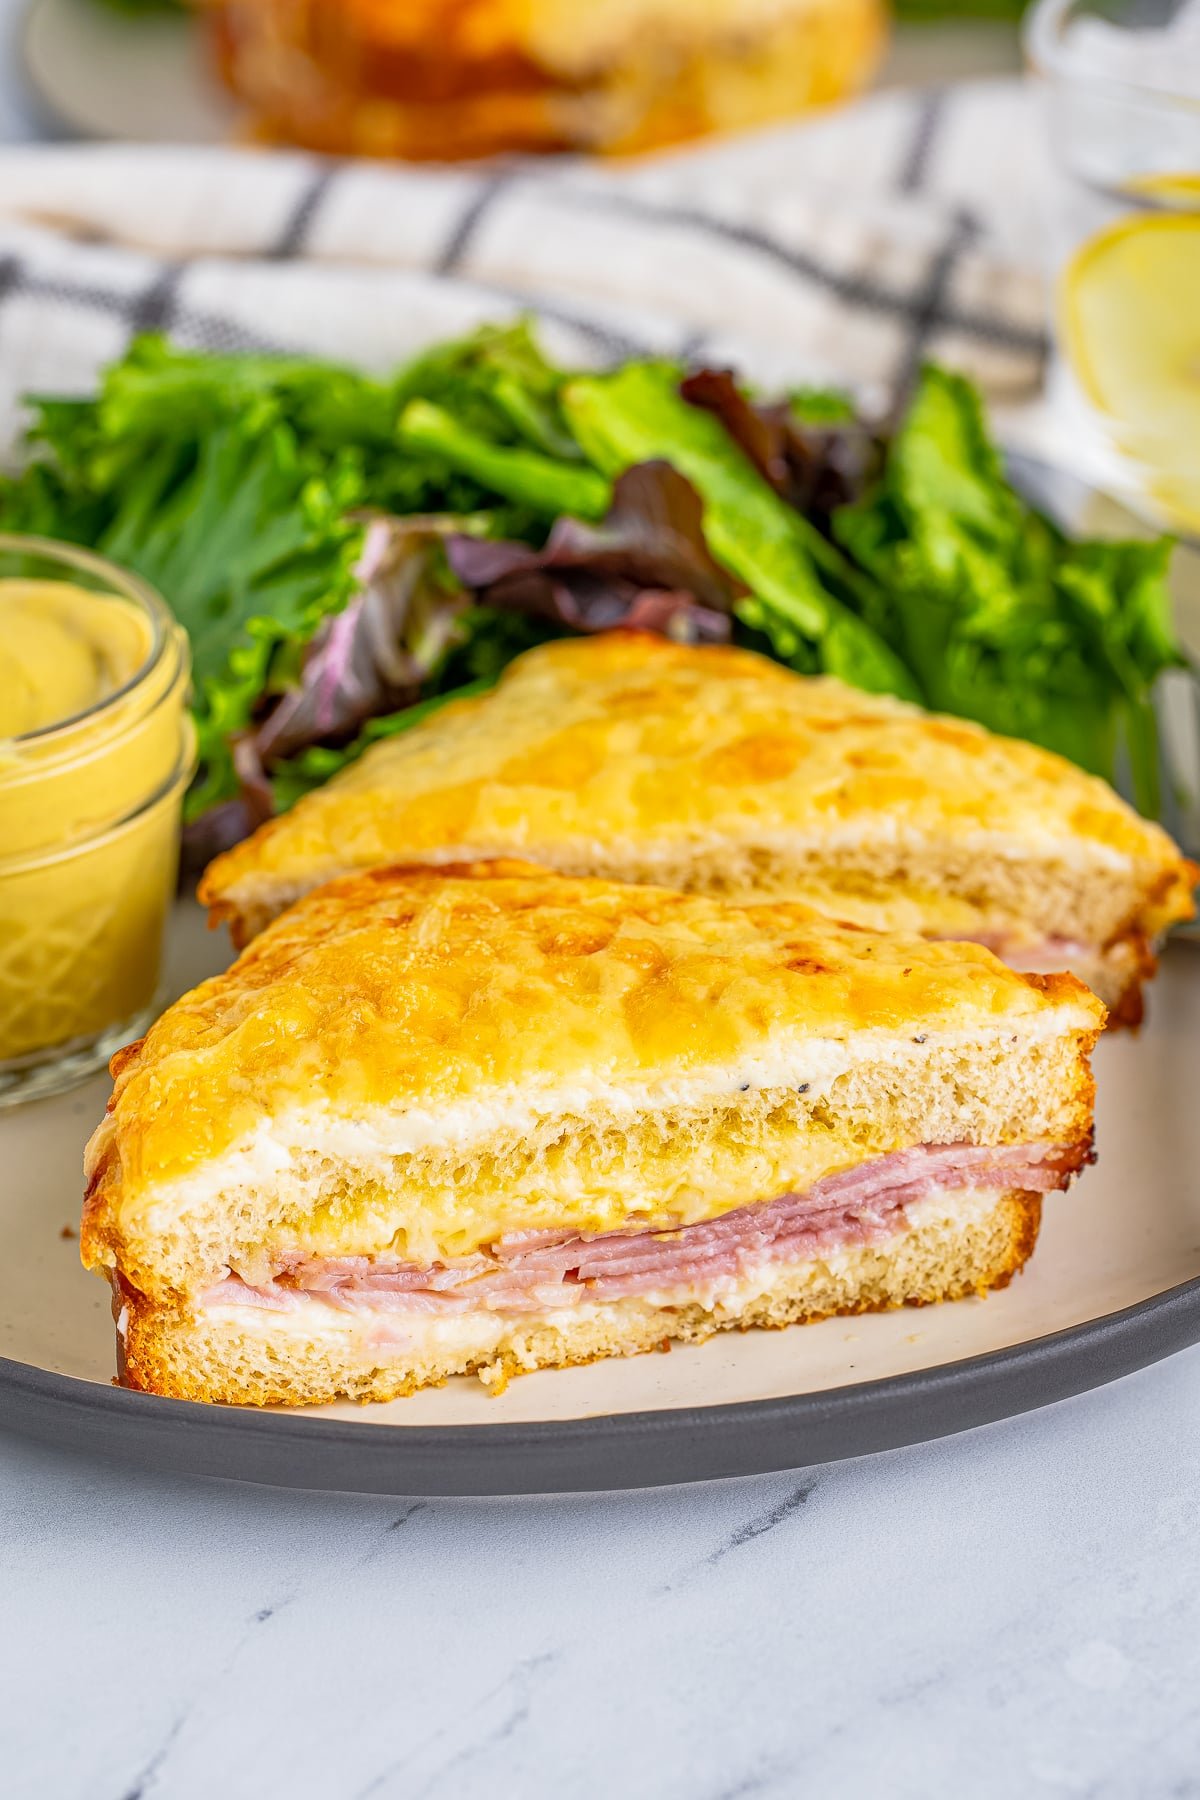 One Croque Monsieur Recipe on plate cut in half with salad.